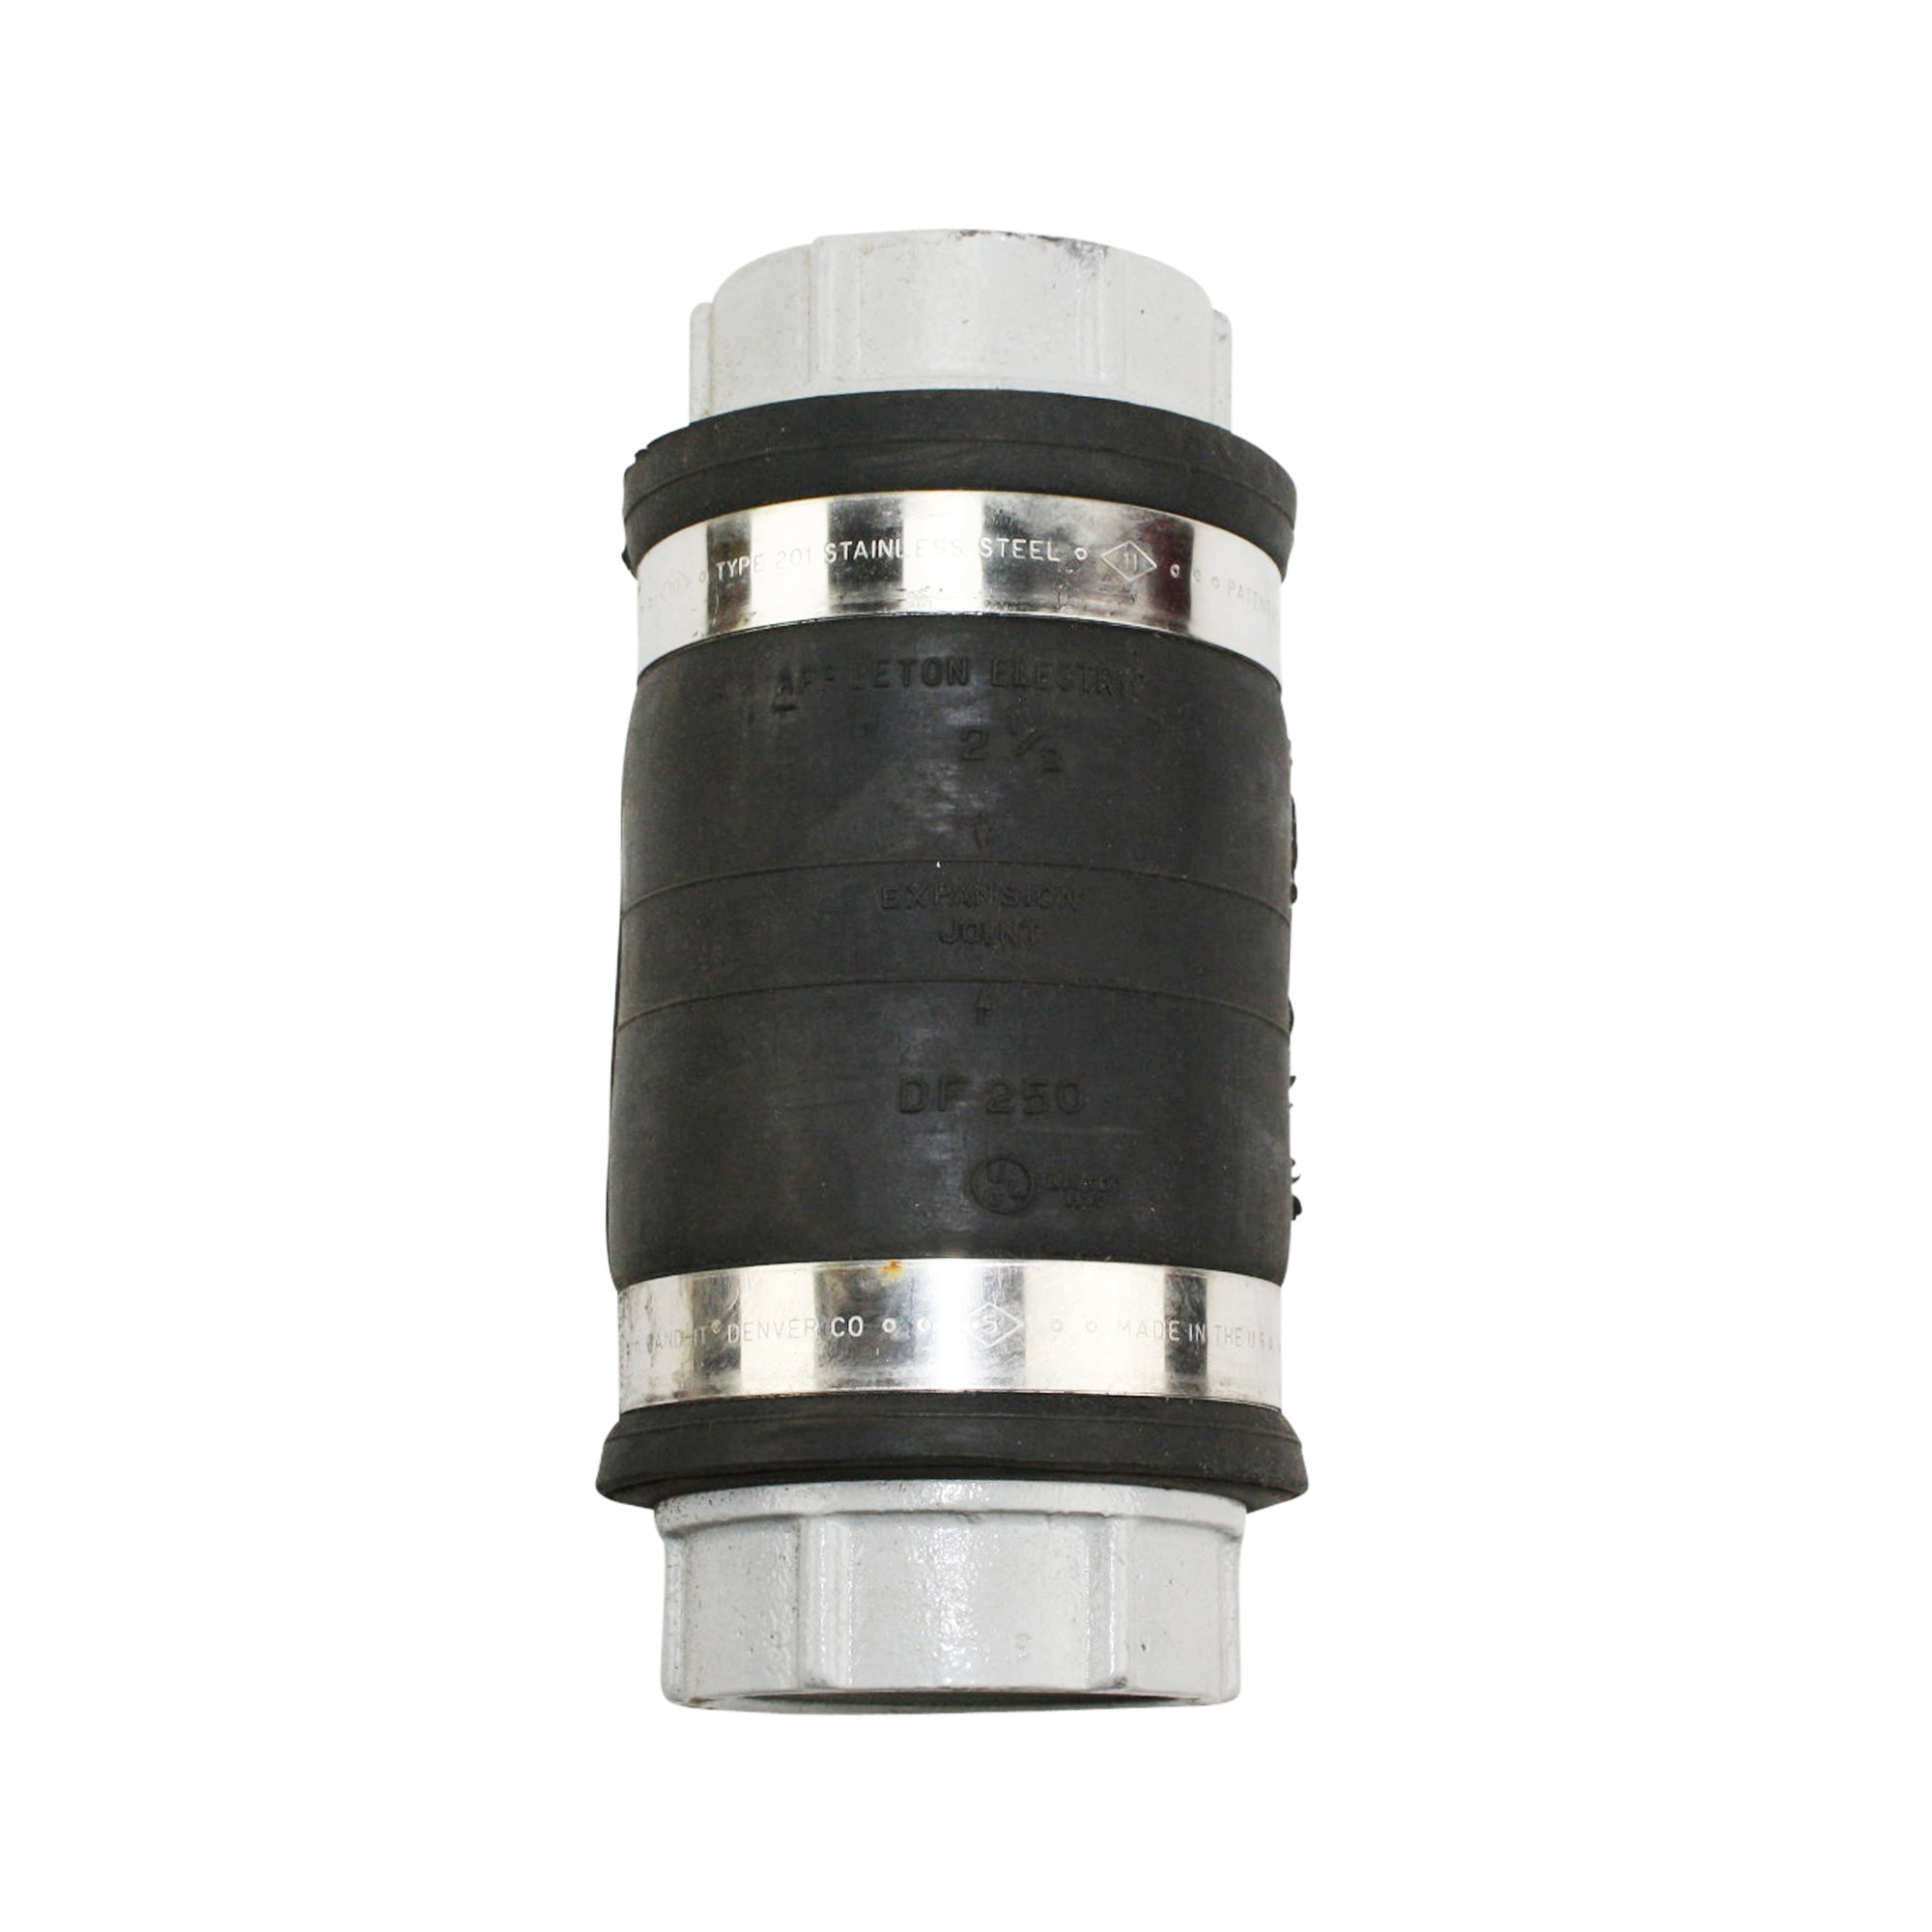 Appleton, APPLETON DF250 EXPANSION AND DEFLECTION COUPLING LIQUID TIGHT 2-1/2"